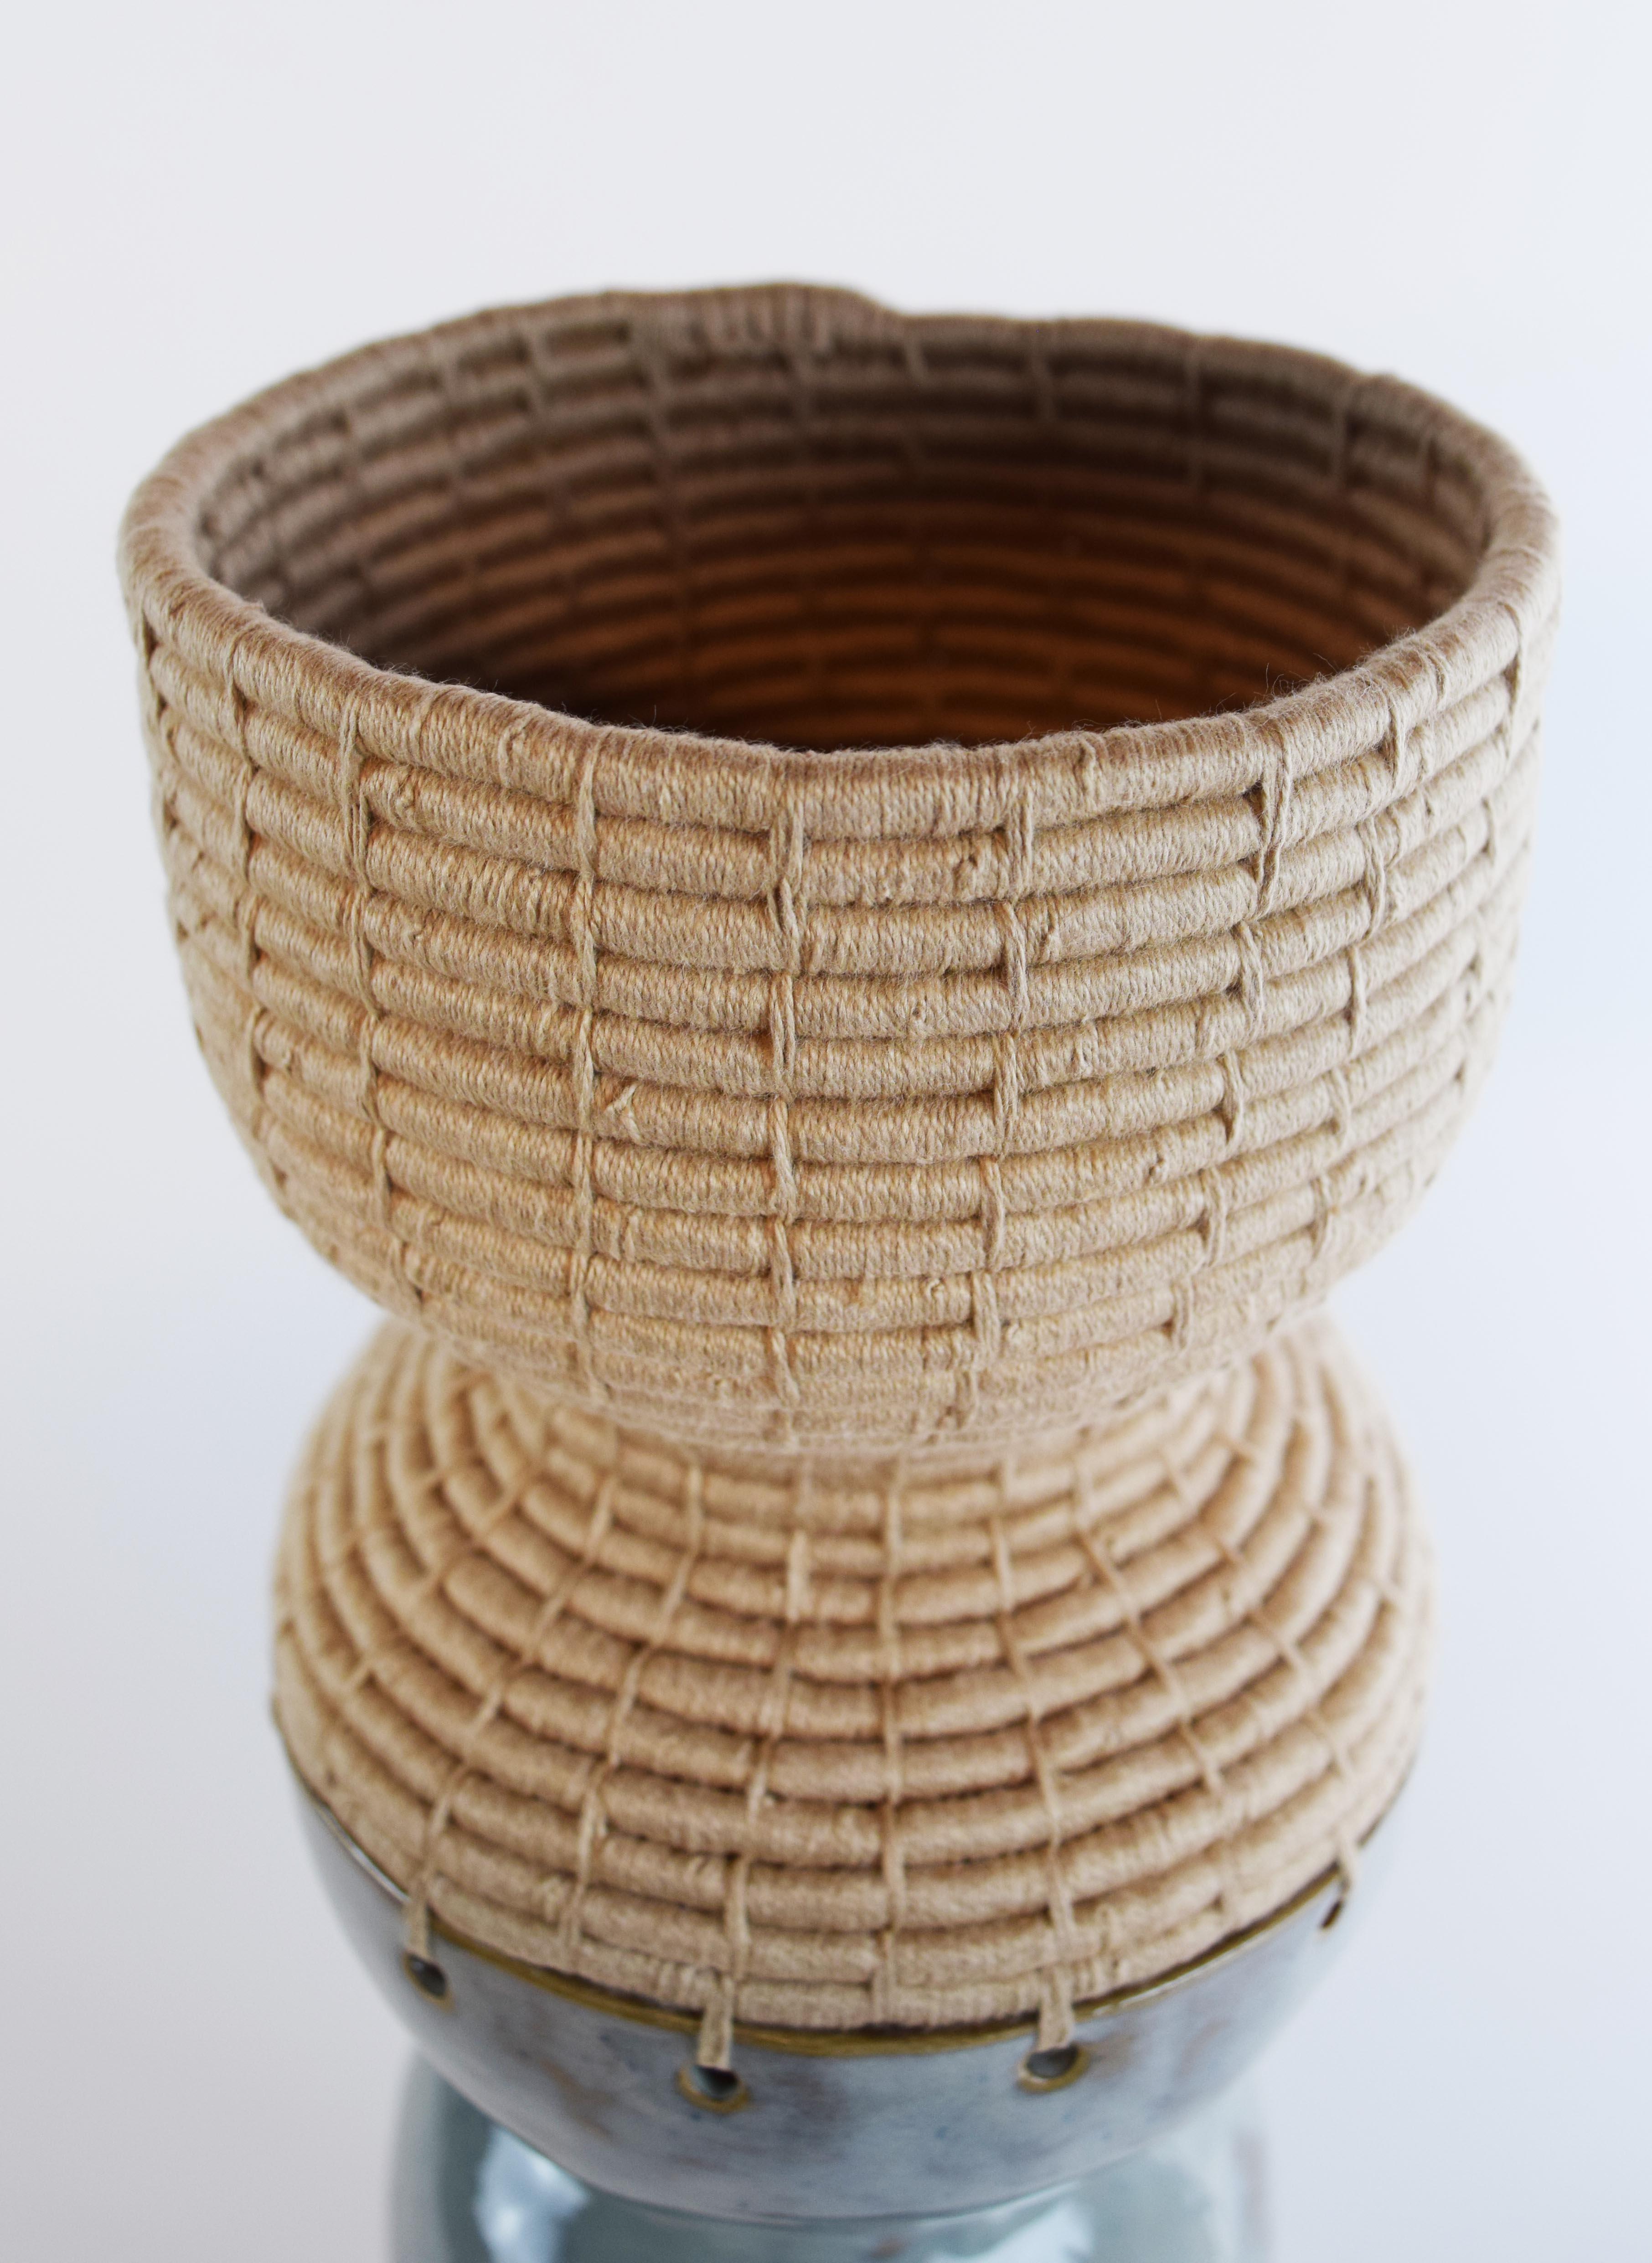 American One of a Kind Ceramic and Woven Cotton Vessel #753, Blue Glaze & Tan Weaving